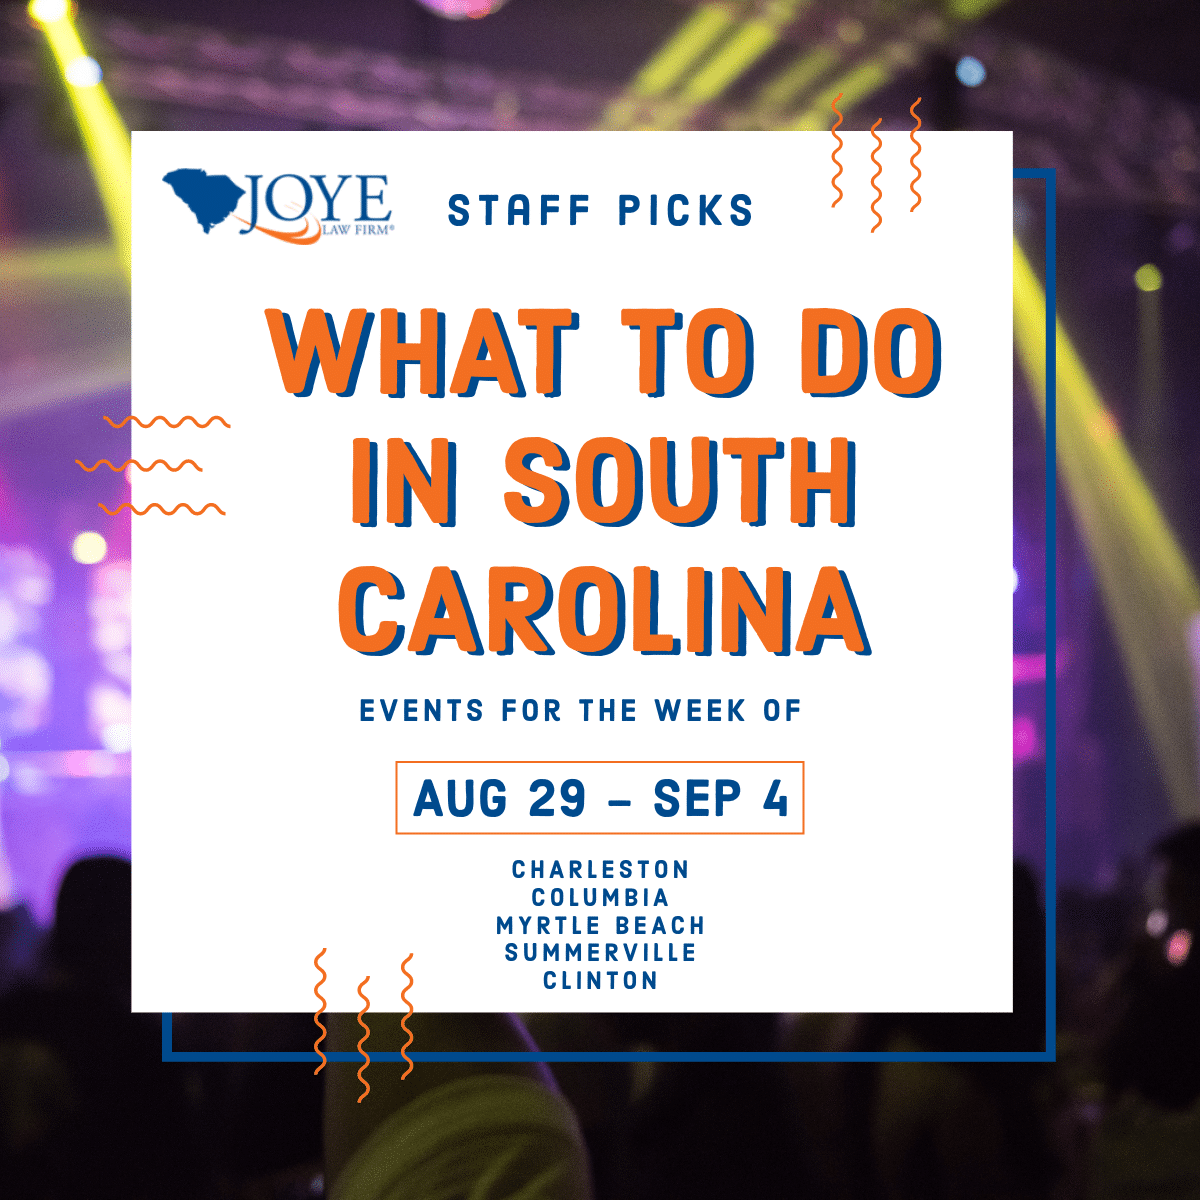 What to do in South Carolina events for the week of Aug 29 - Sep 4 for Charleston, Columbia, Myrtle Beach, Summerville and upstate